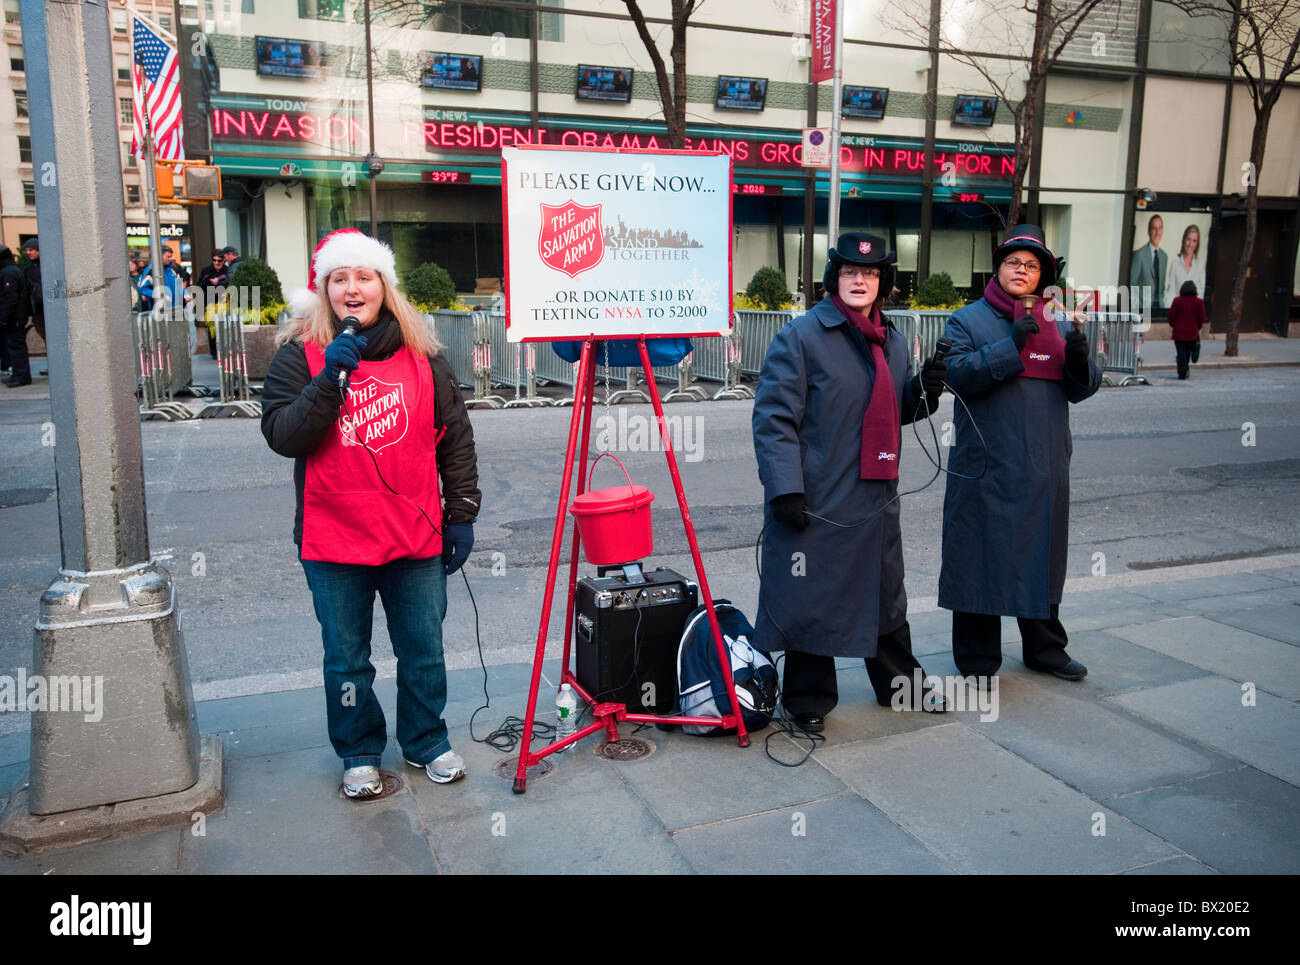 https://c8.alamy.com/comp/BX20E2/salvation-army-bell-ringers-kick-off-their-kettle-drive-in-rockefeller-BX20E2.jpg